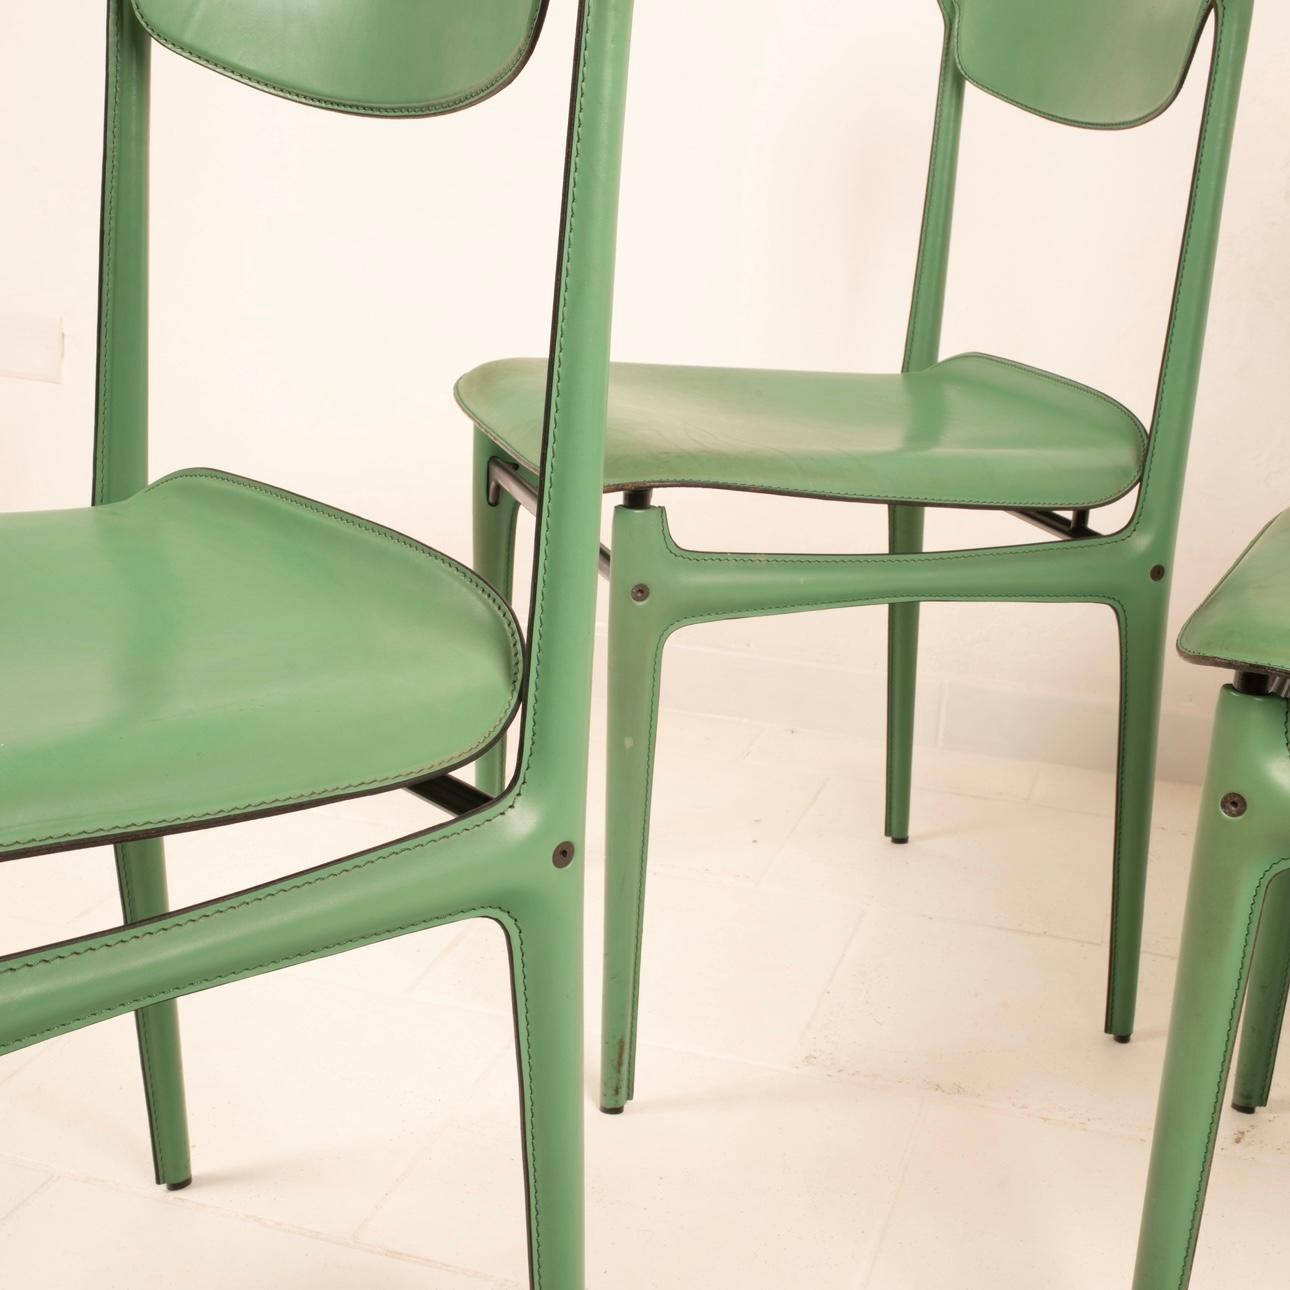 Extraordinary and rare set of 4 teal leather chairs designed by Tito Agnoli and produced by Matteo Grassi. The chairs feature high-quality leather upholstery with fine details and stitching that give them a timeless elegance. Despite some signs of